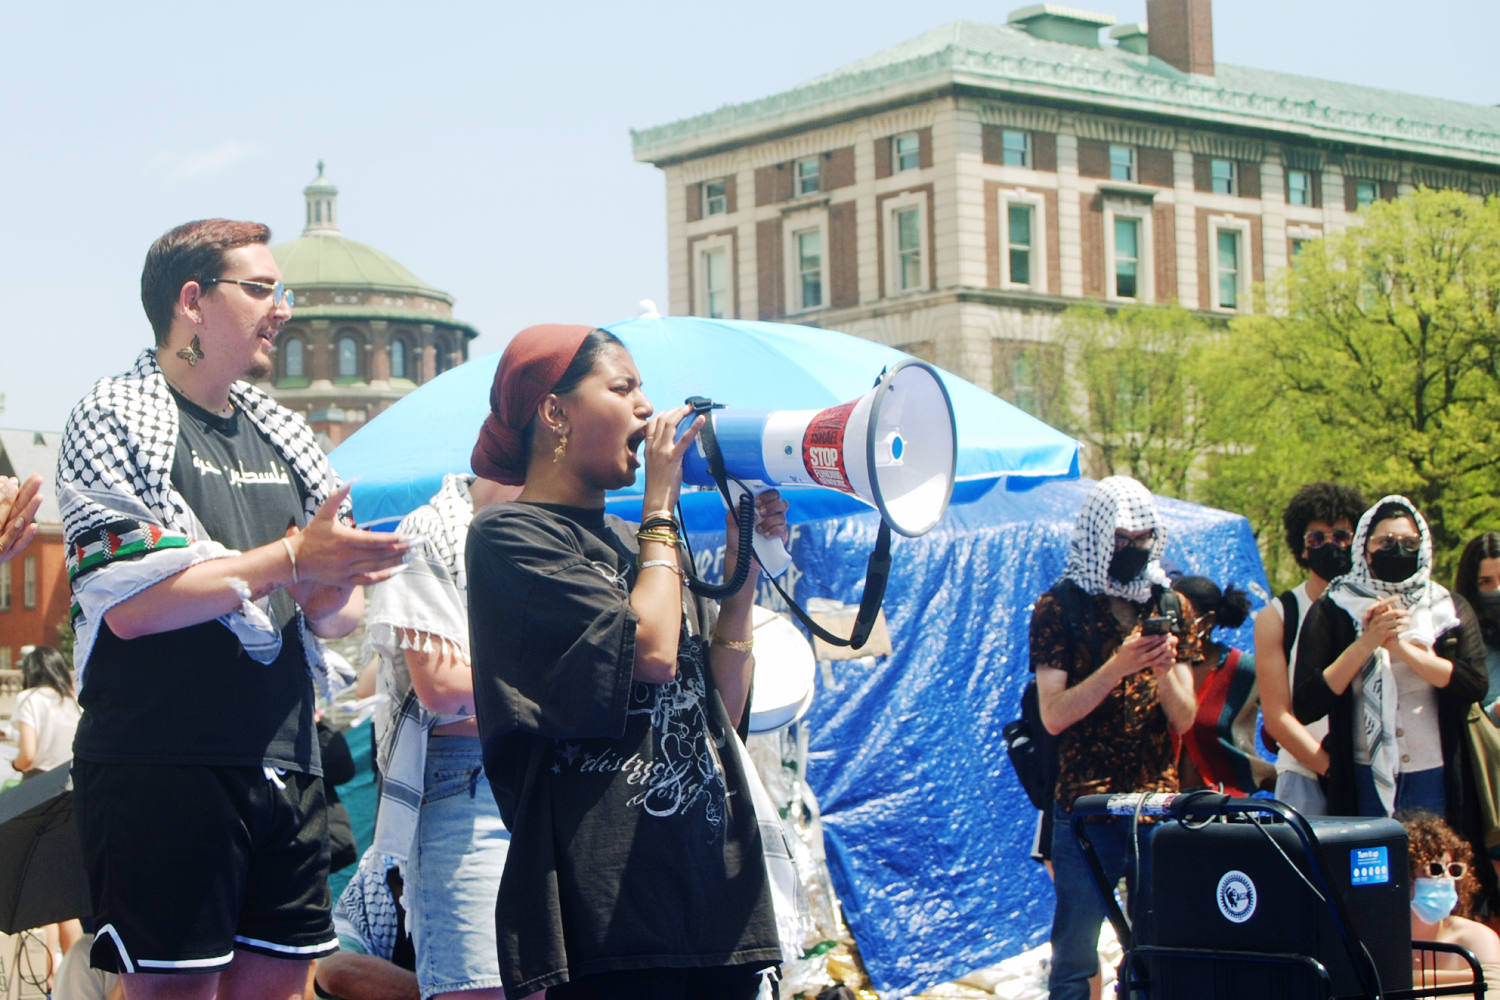 Student protestors defy Columbia University's deadline to vacate campus or face suspension